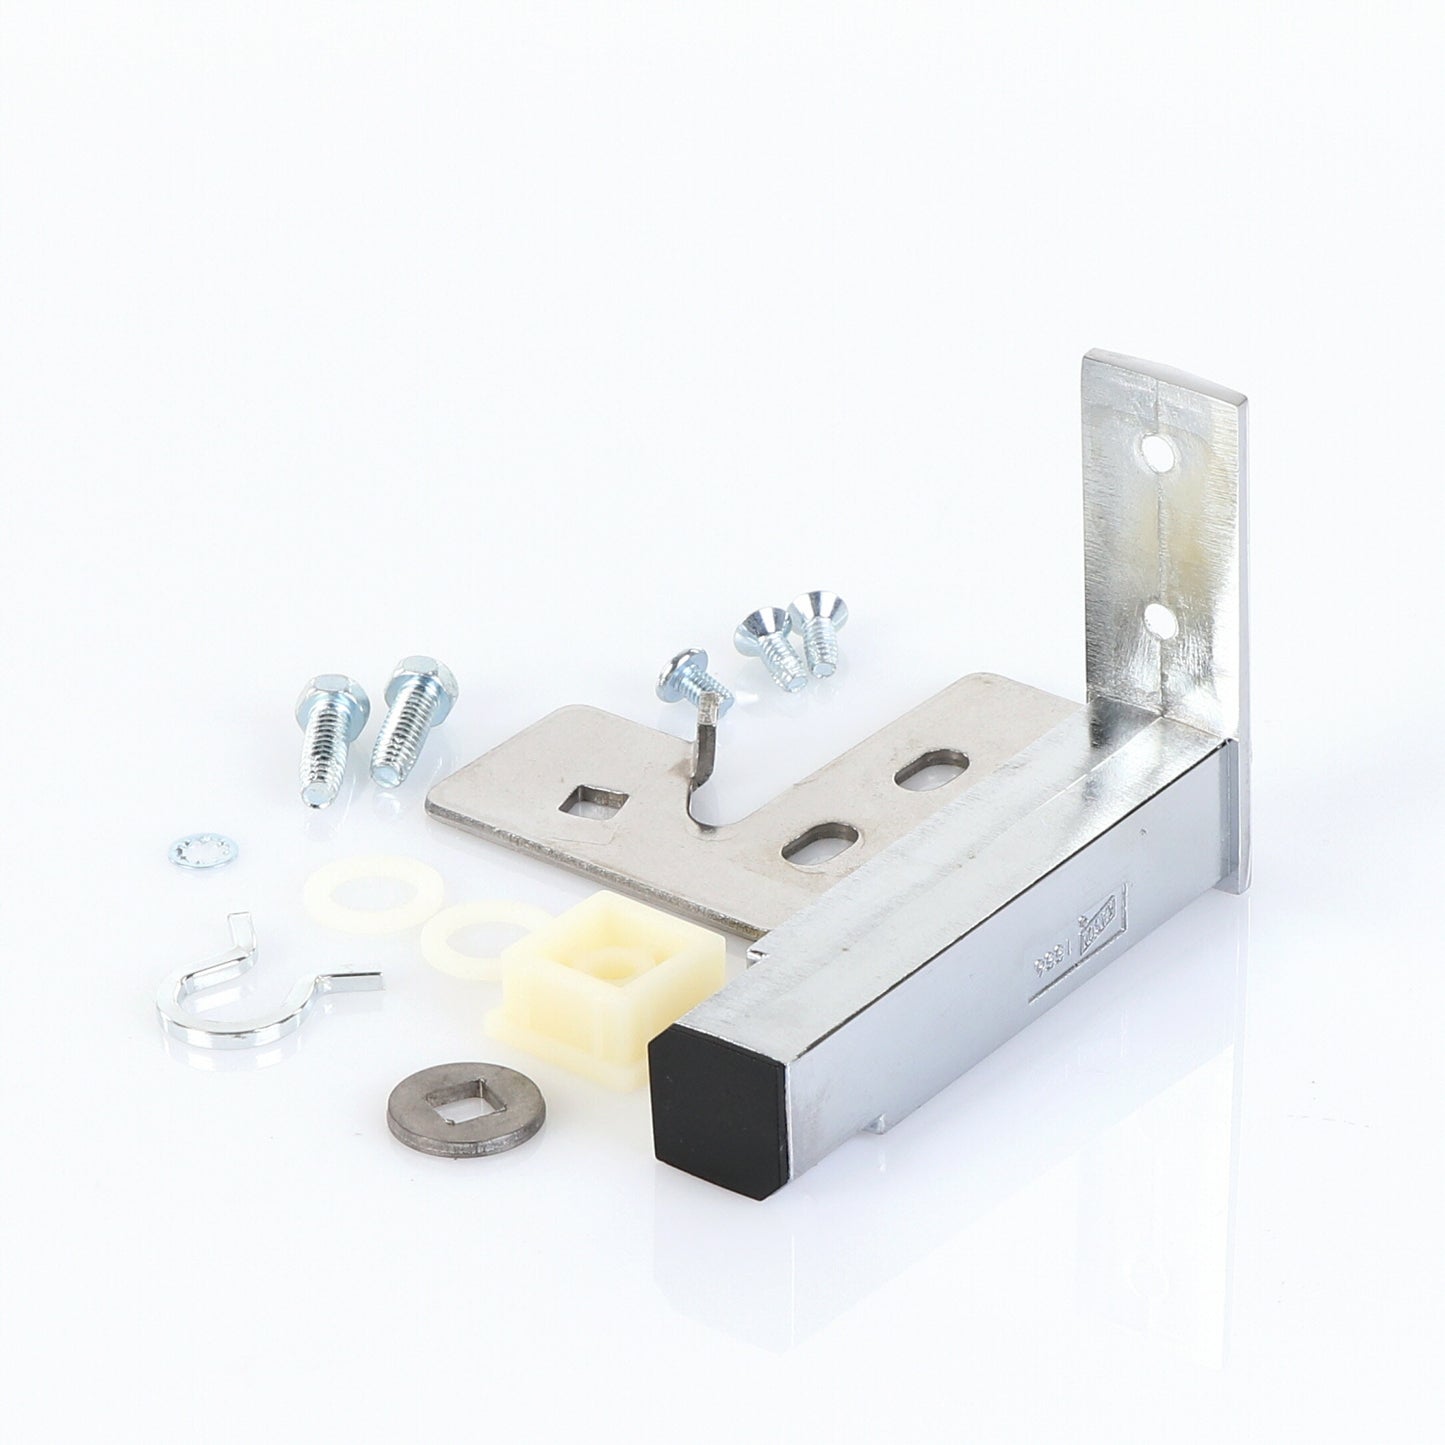 HINGE KIT, DOOR, TOP, RIGHT, CARTRIDGE SPRING WITH 90 DEGREE STAY OPEN FEATURE (SKU - 870837)